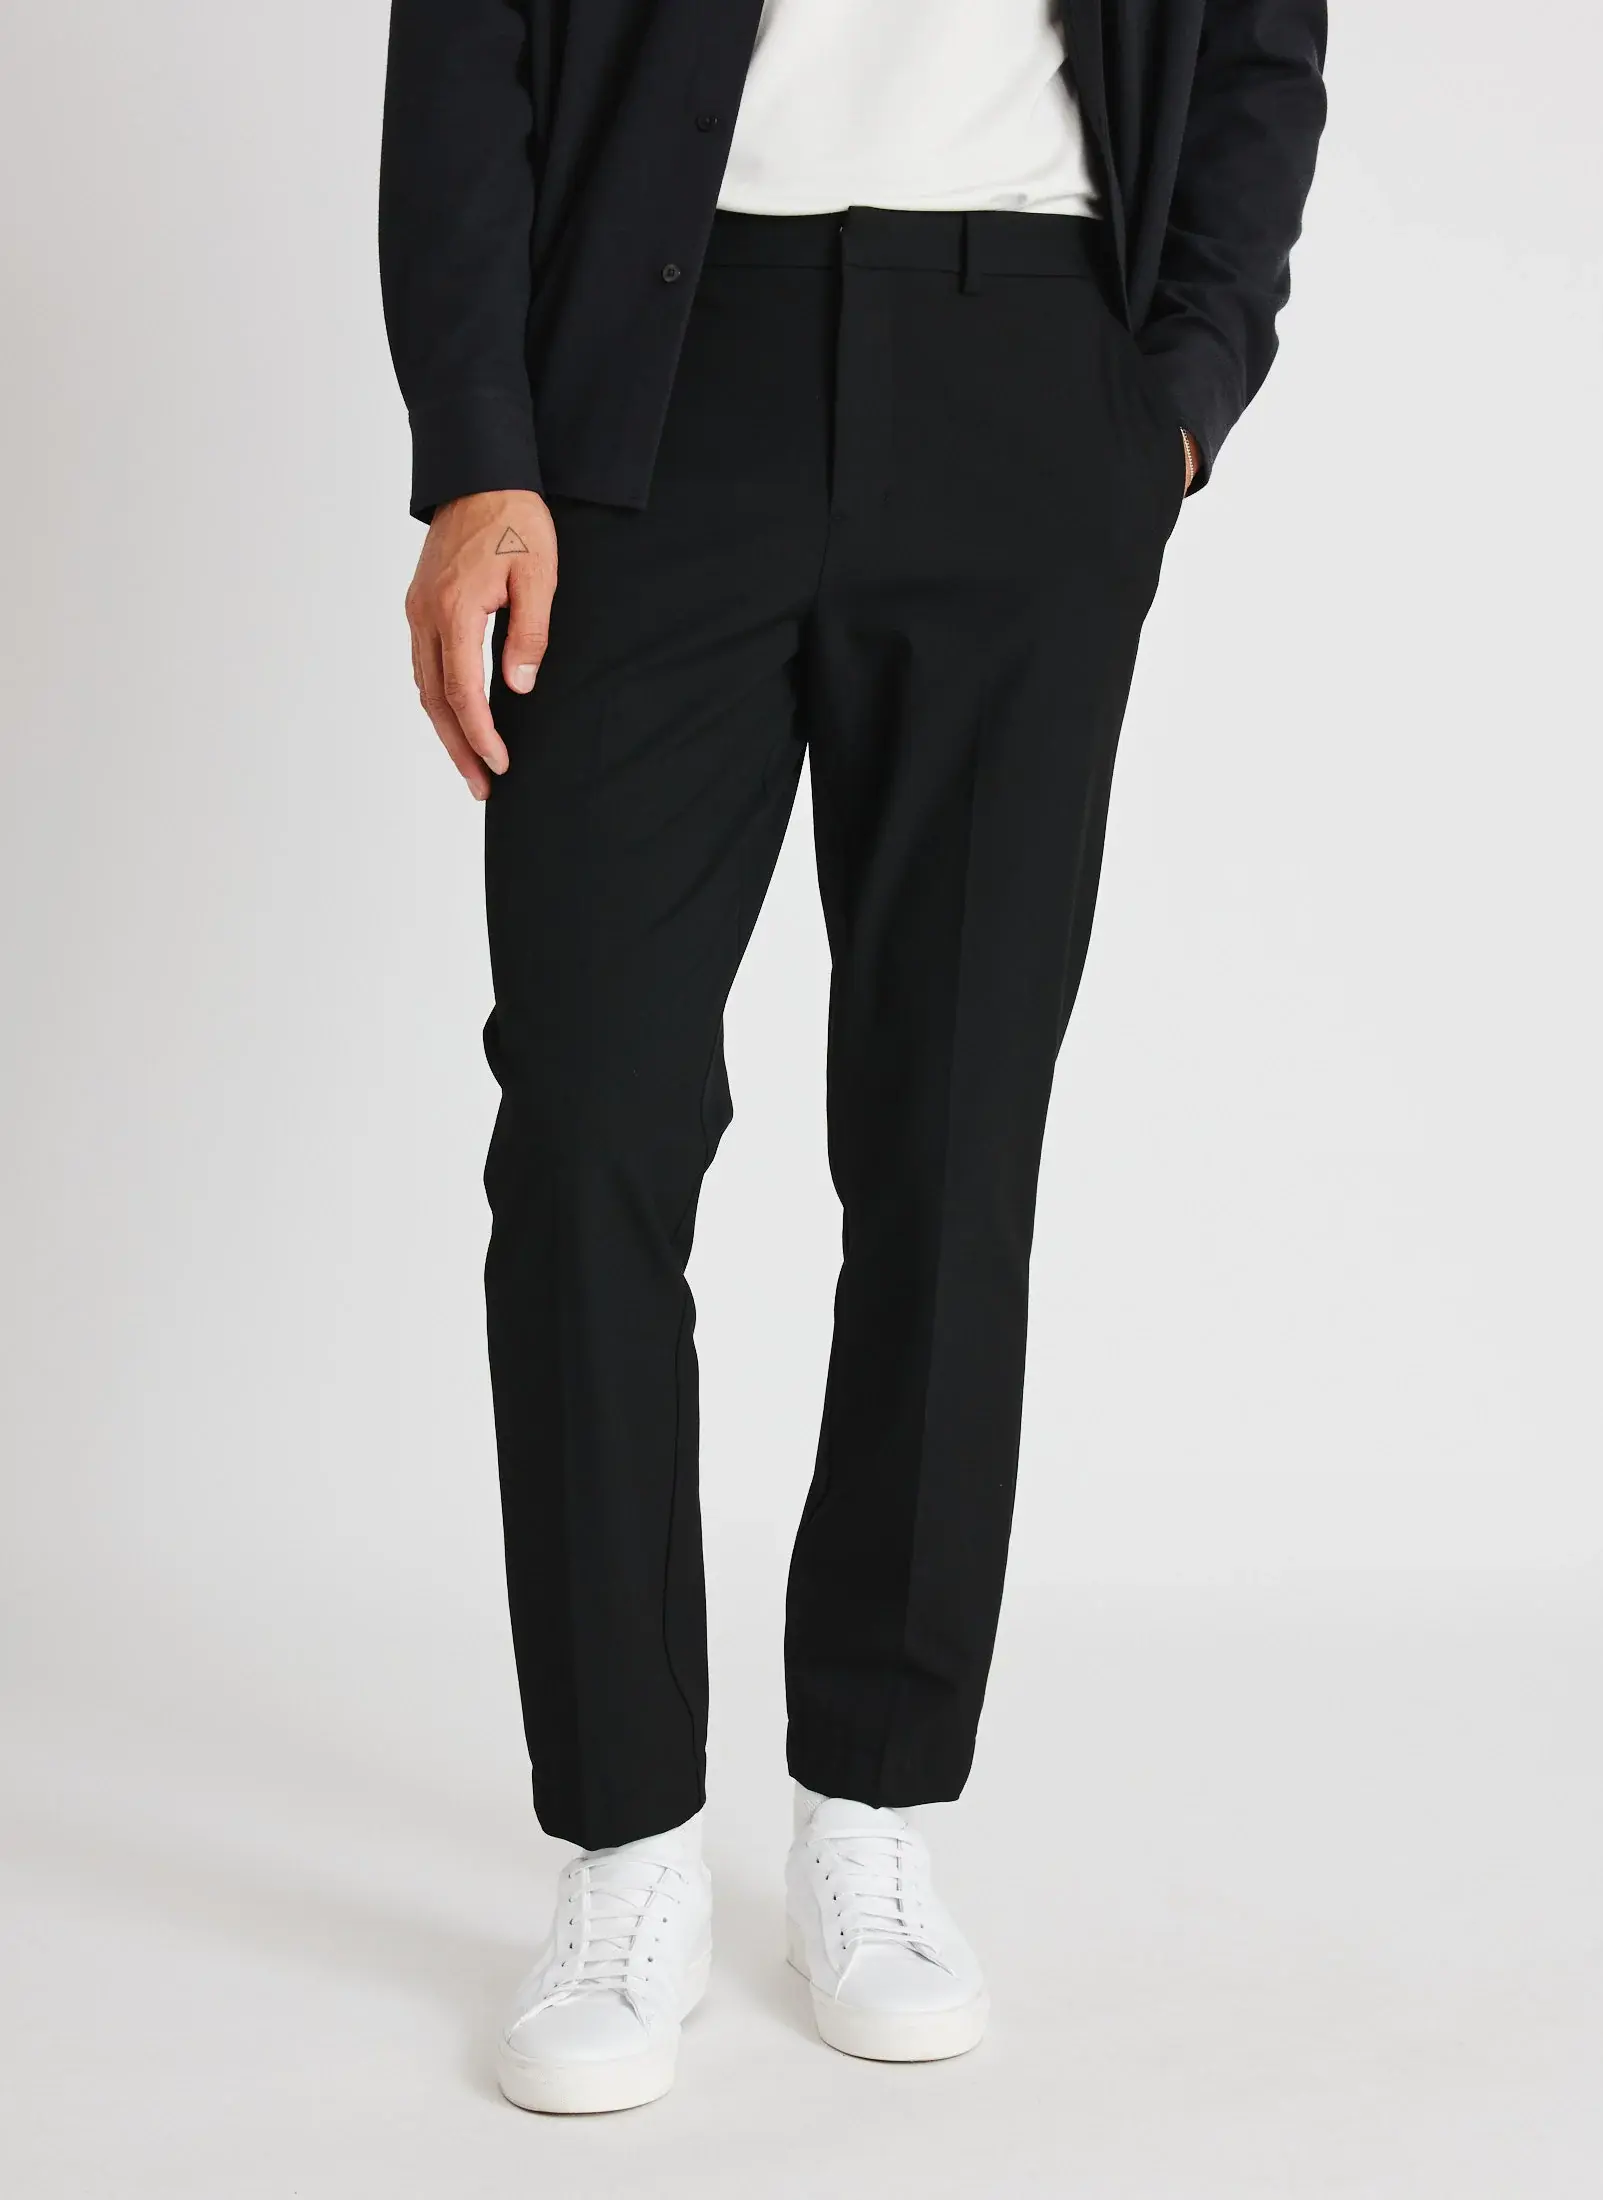 Kit And Ace Recycled Suiting Standard Trousers. 1